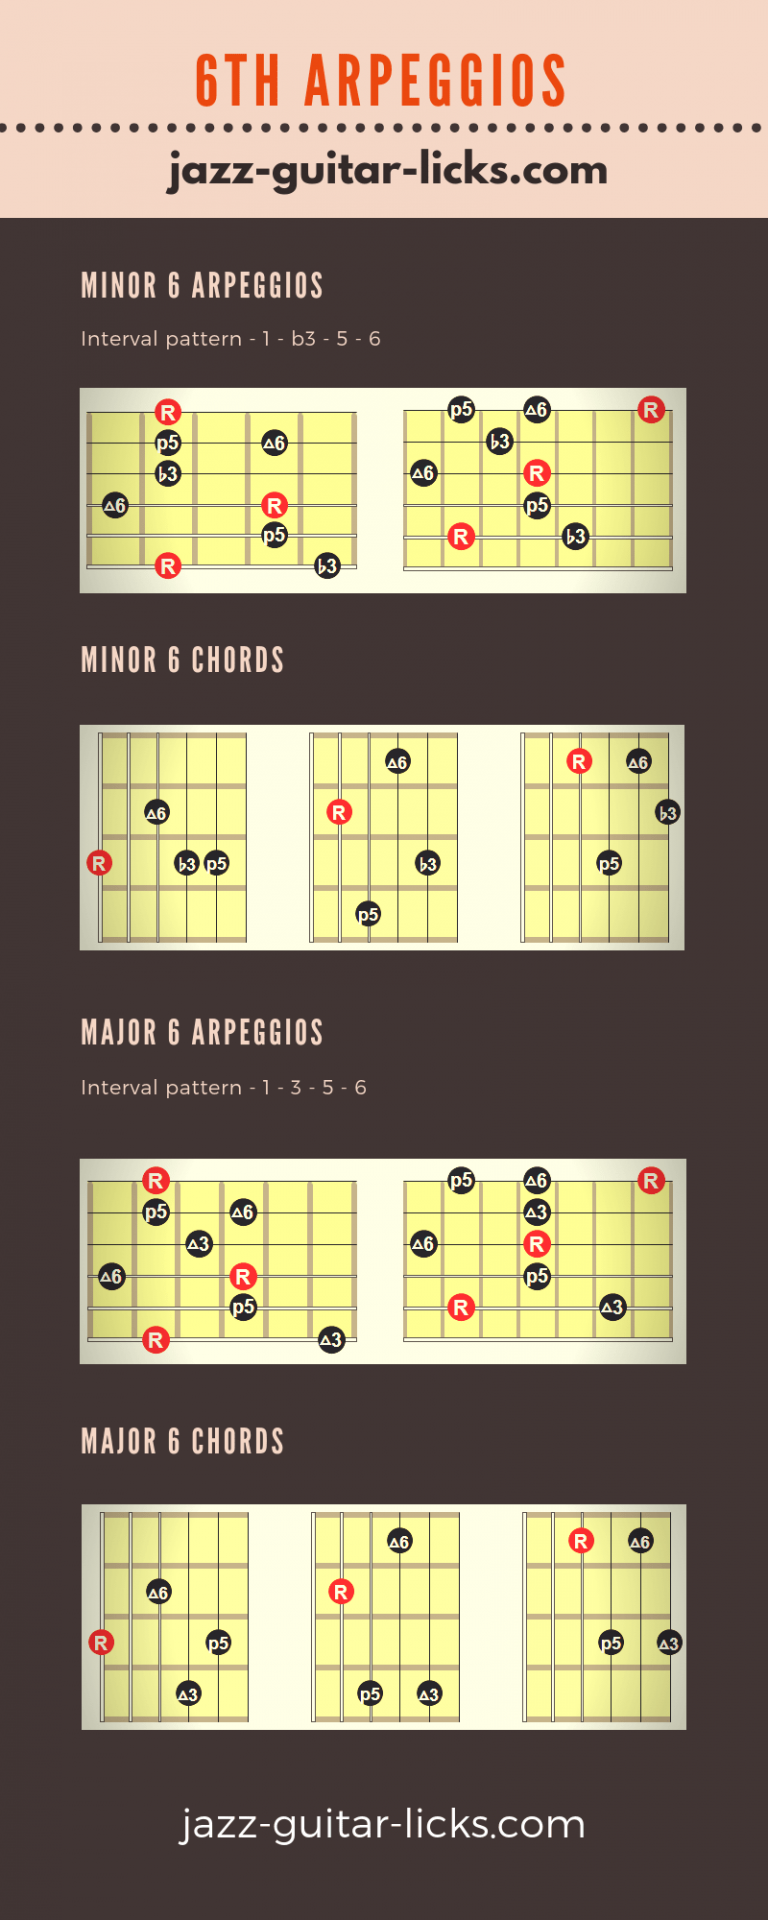 6th arpeggios and chords for guitar